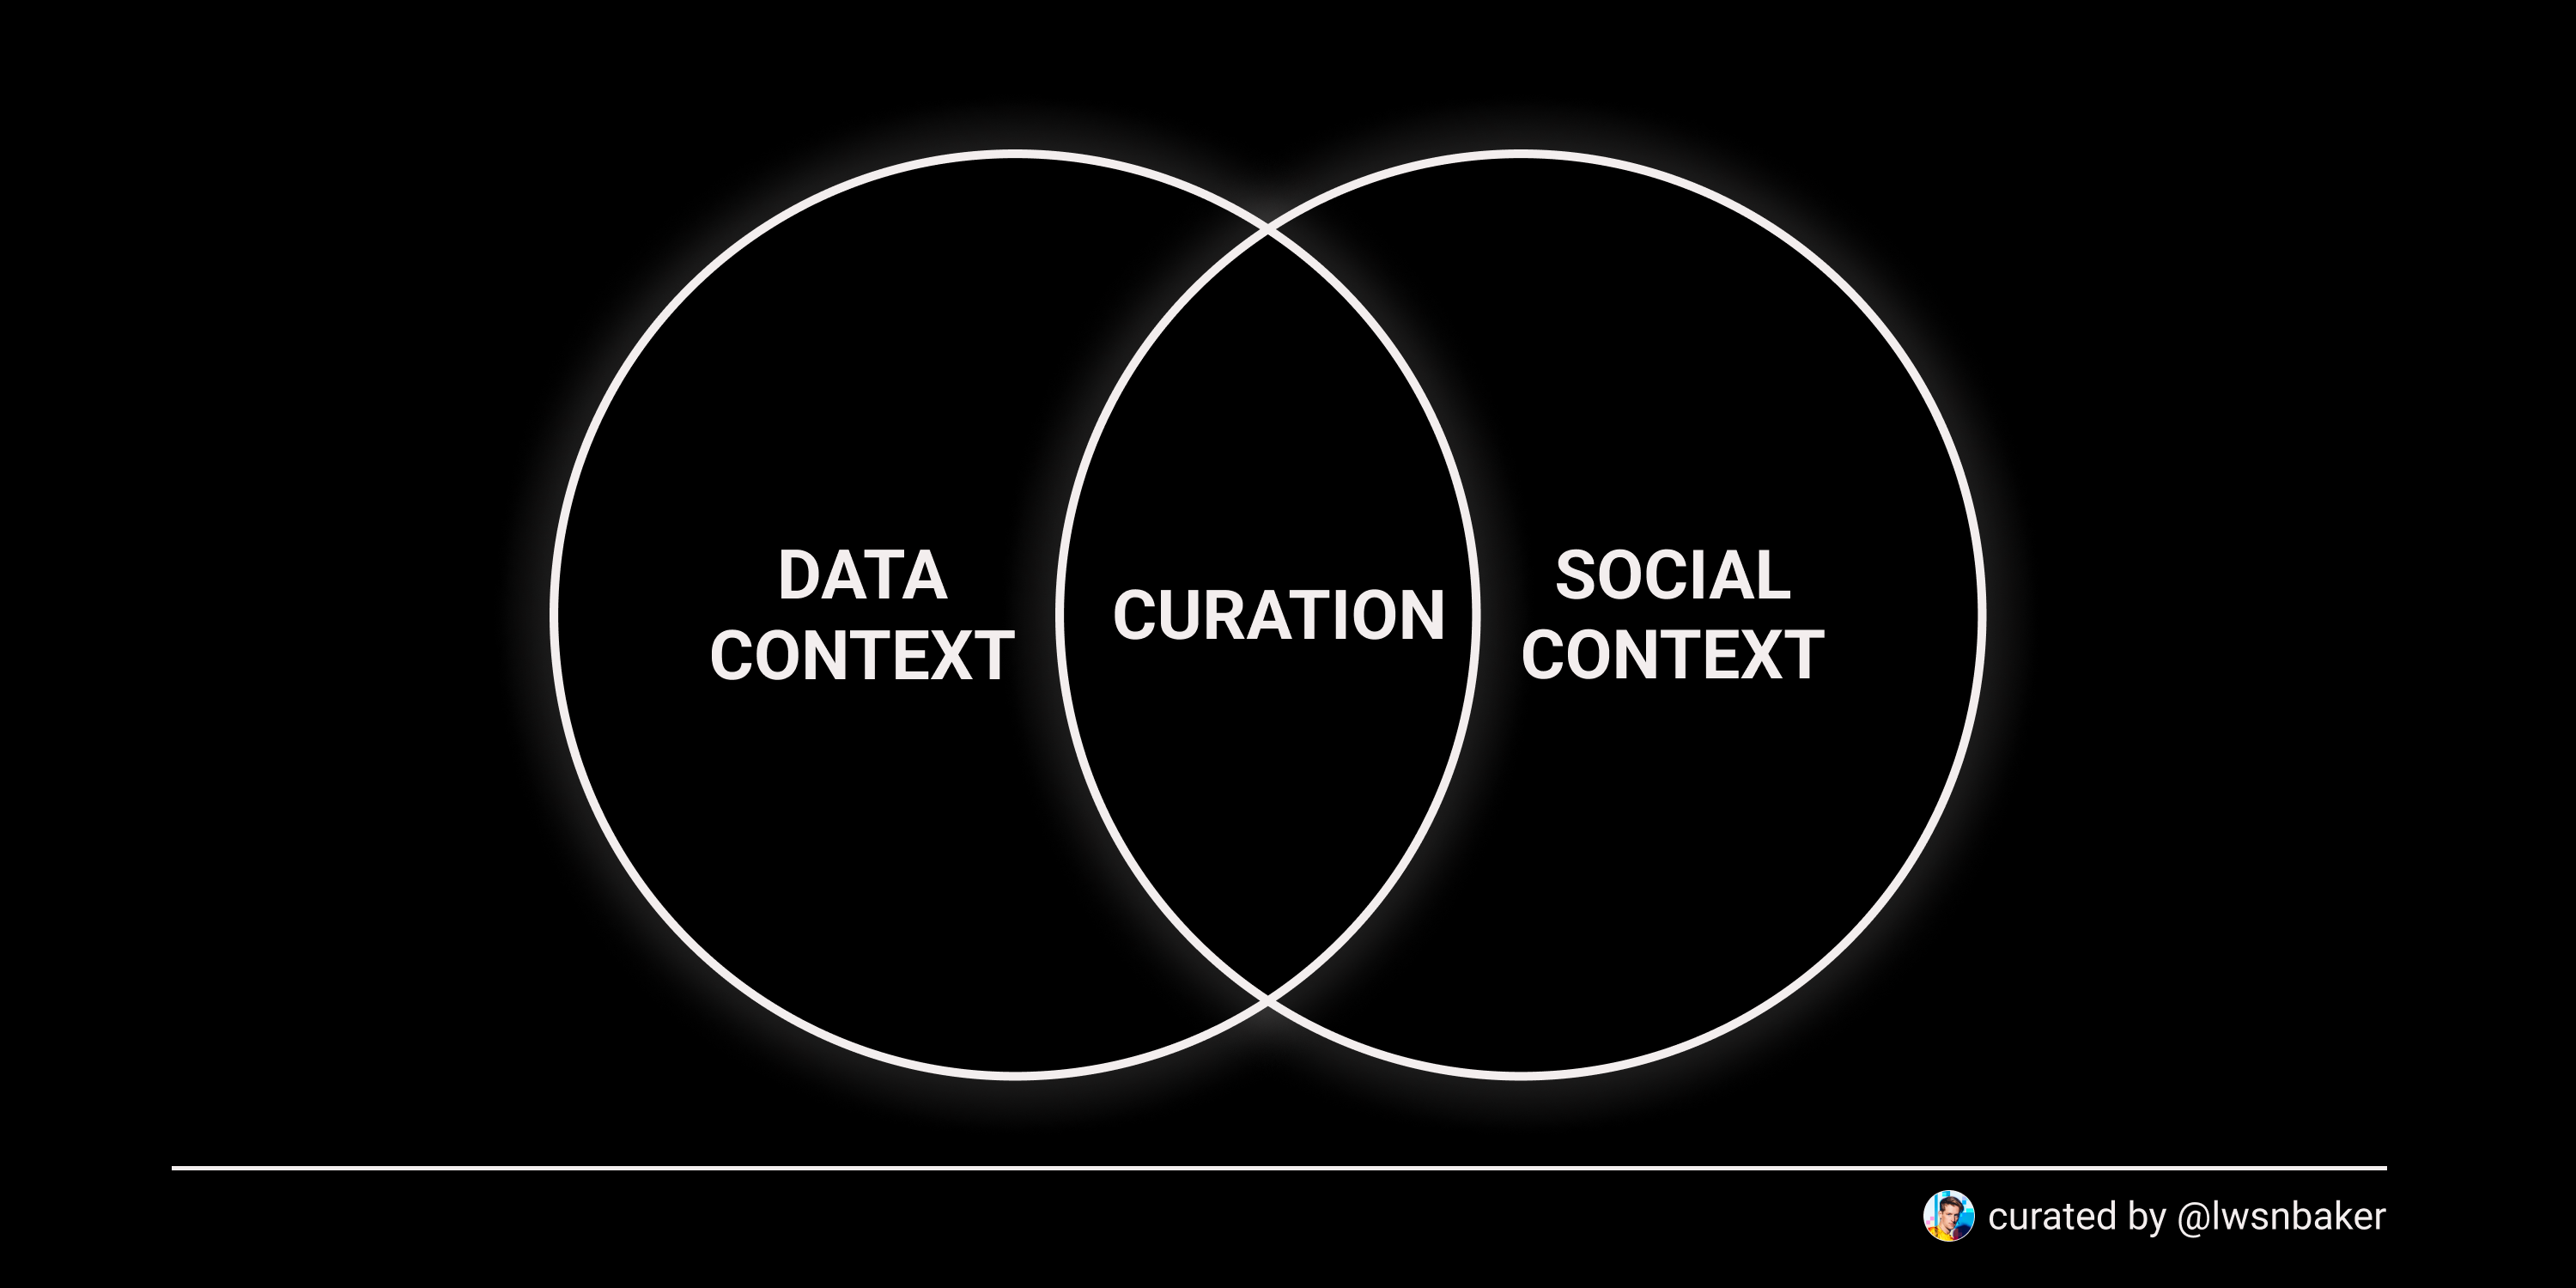 Curation is where data context (e.g. who the creator is, type of media, or who has engaged with an NFT) meet social context (read: how culture engages with the NFT and its surroundings).